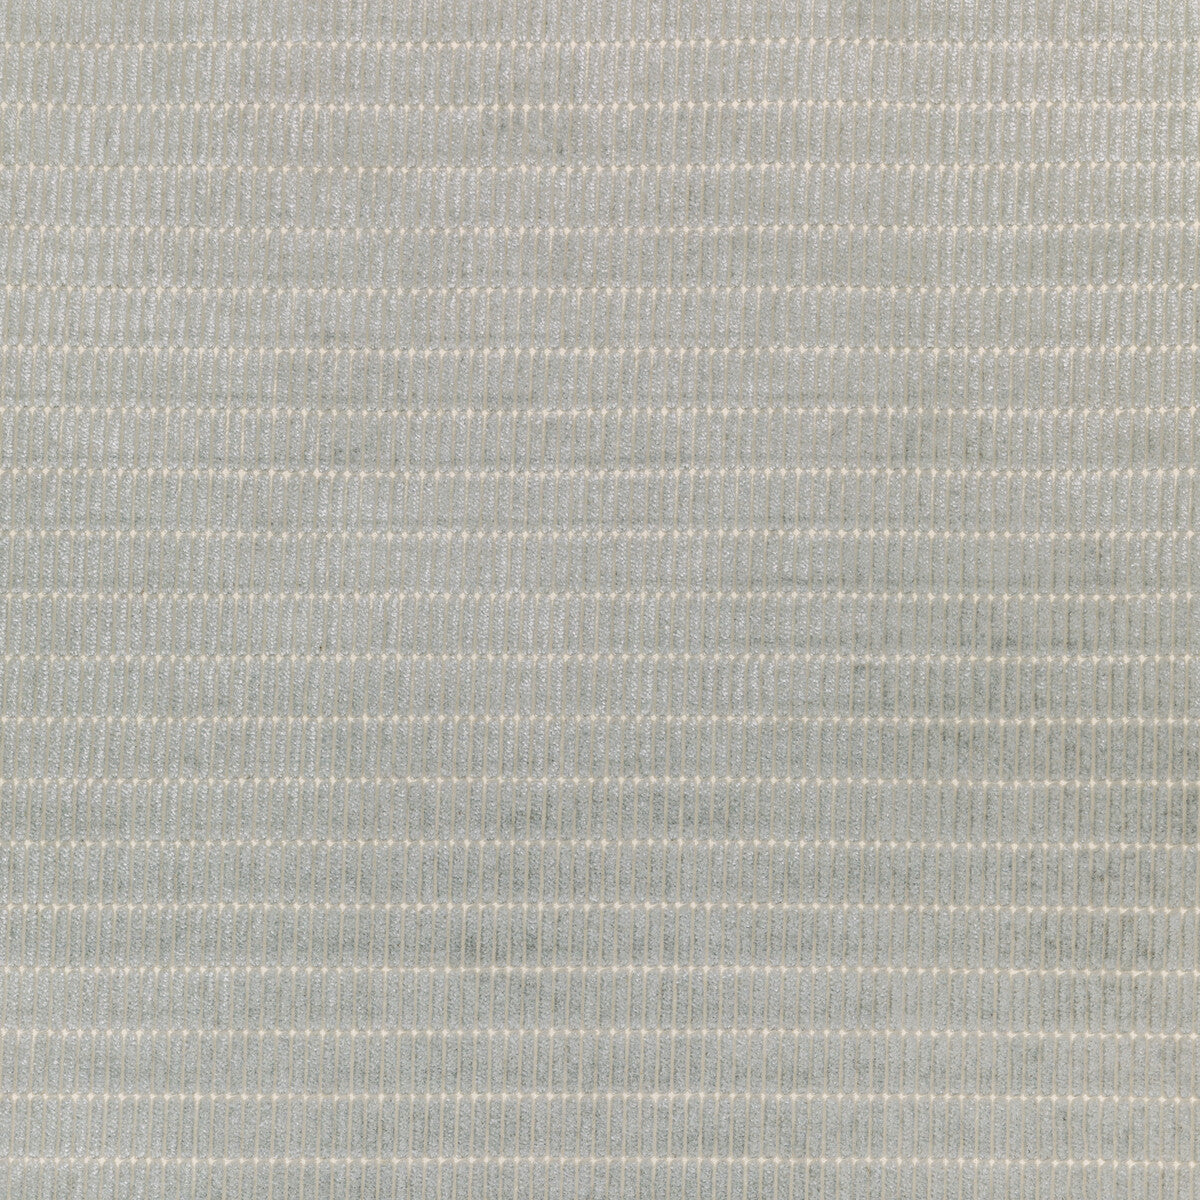 Boarding Pass fabric in pebble color - pattern 34106.11.0 - by Kravet Couture in the Modern Luxe III collection